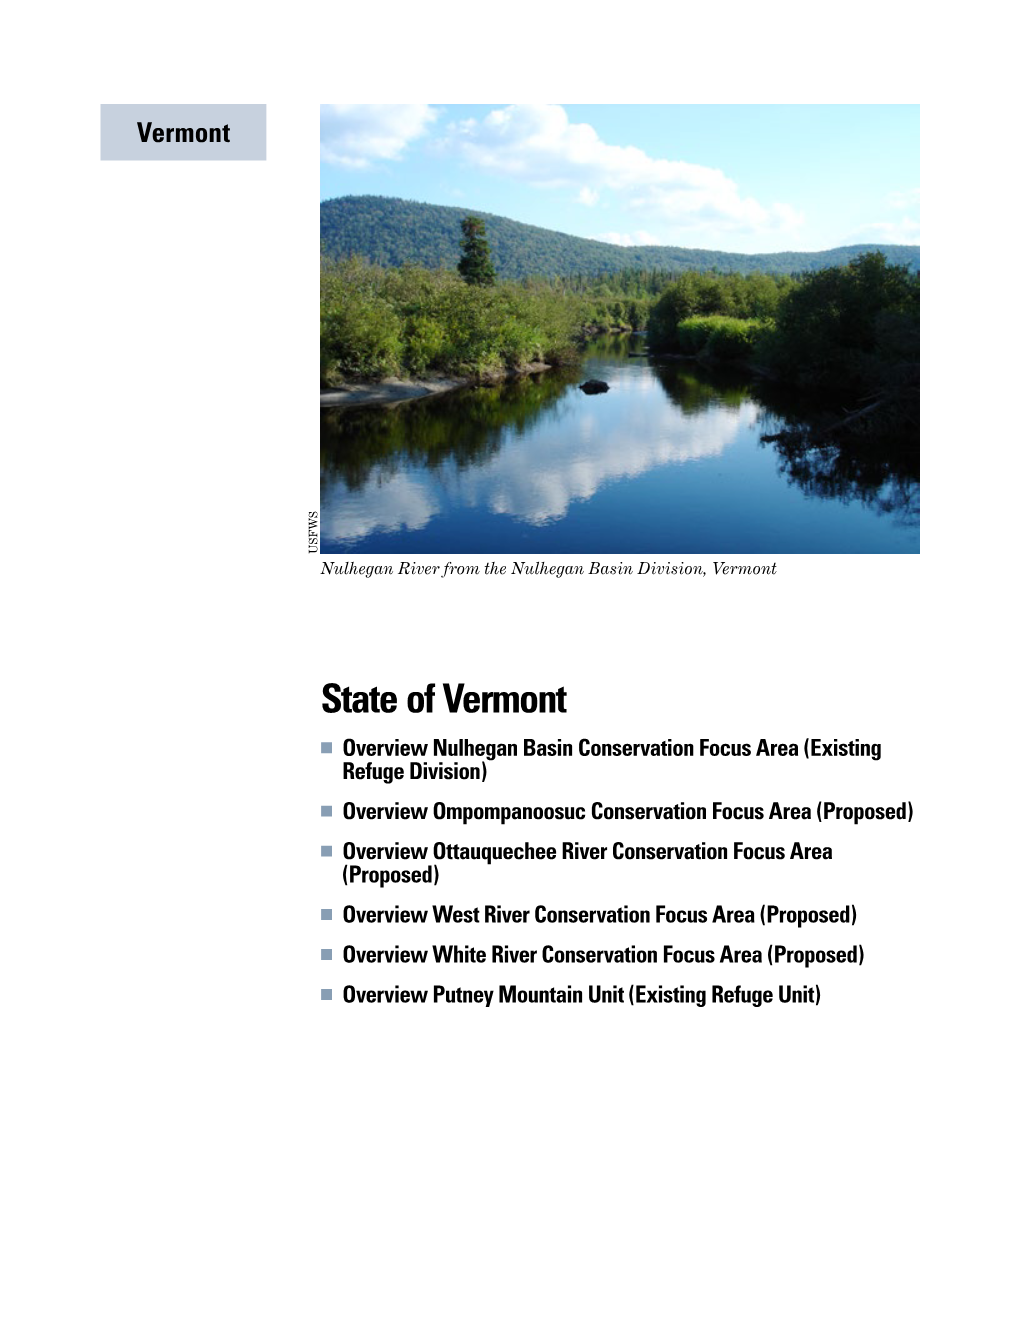 Vermont Conservation Focus Areas and Units